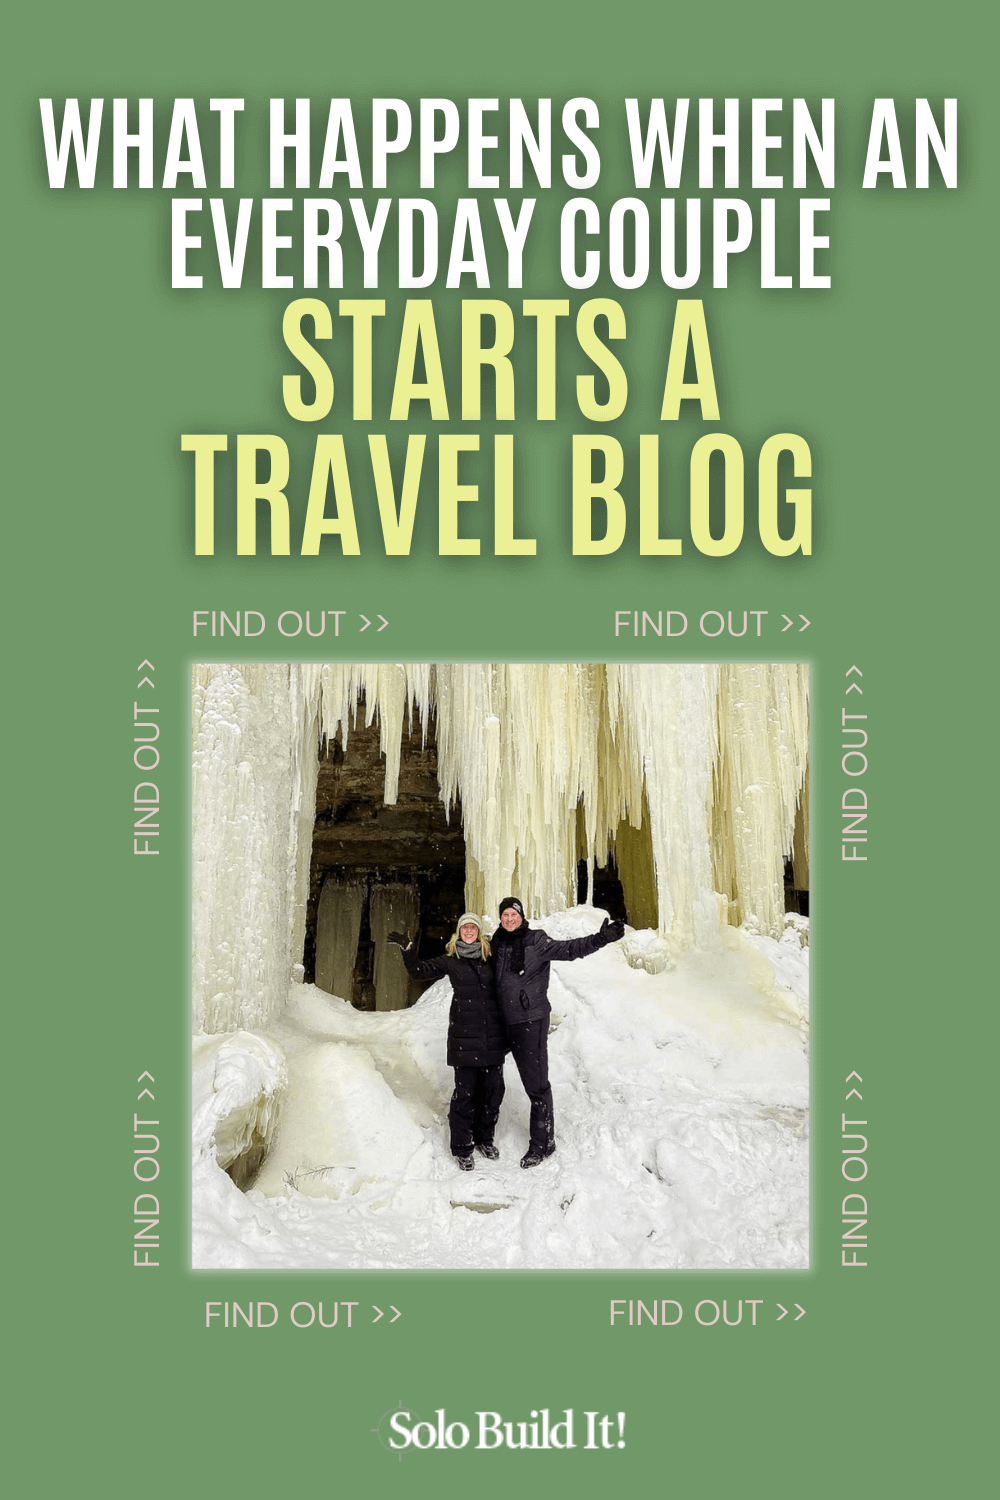 From Zero to Full-Time Travel Blog Income in 4 Years: Michigan Travel Blogger Shares Her Insights